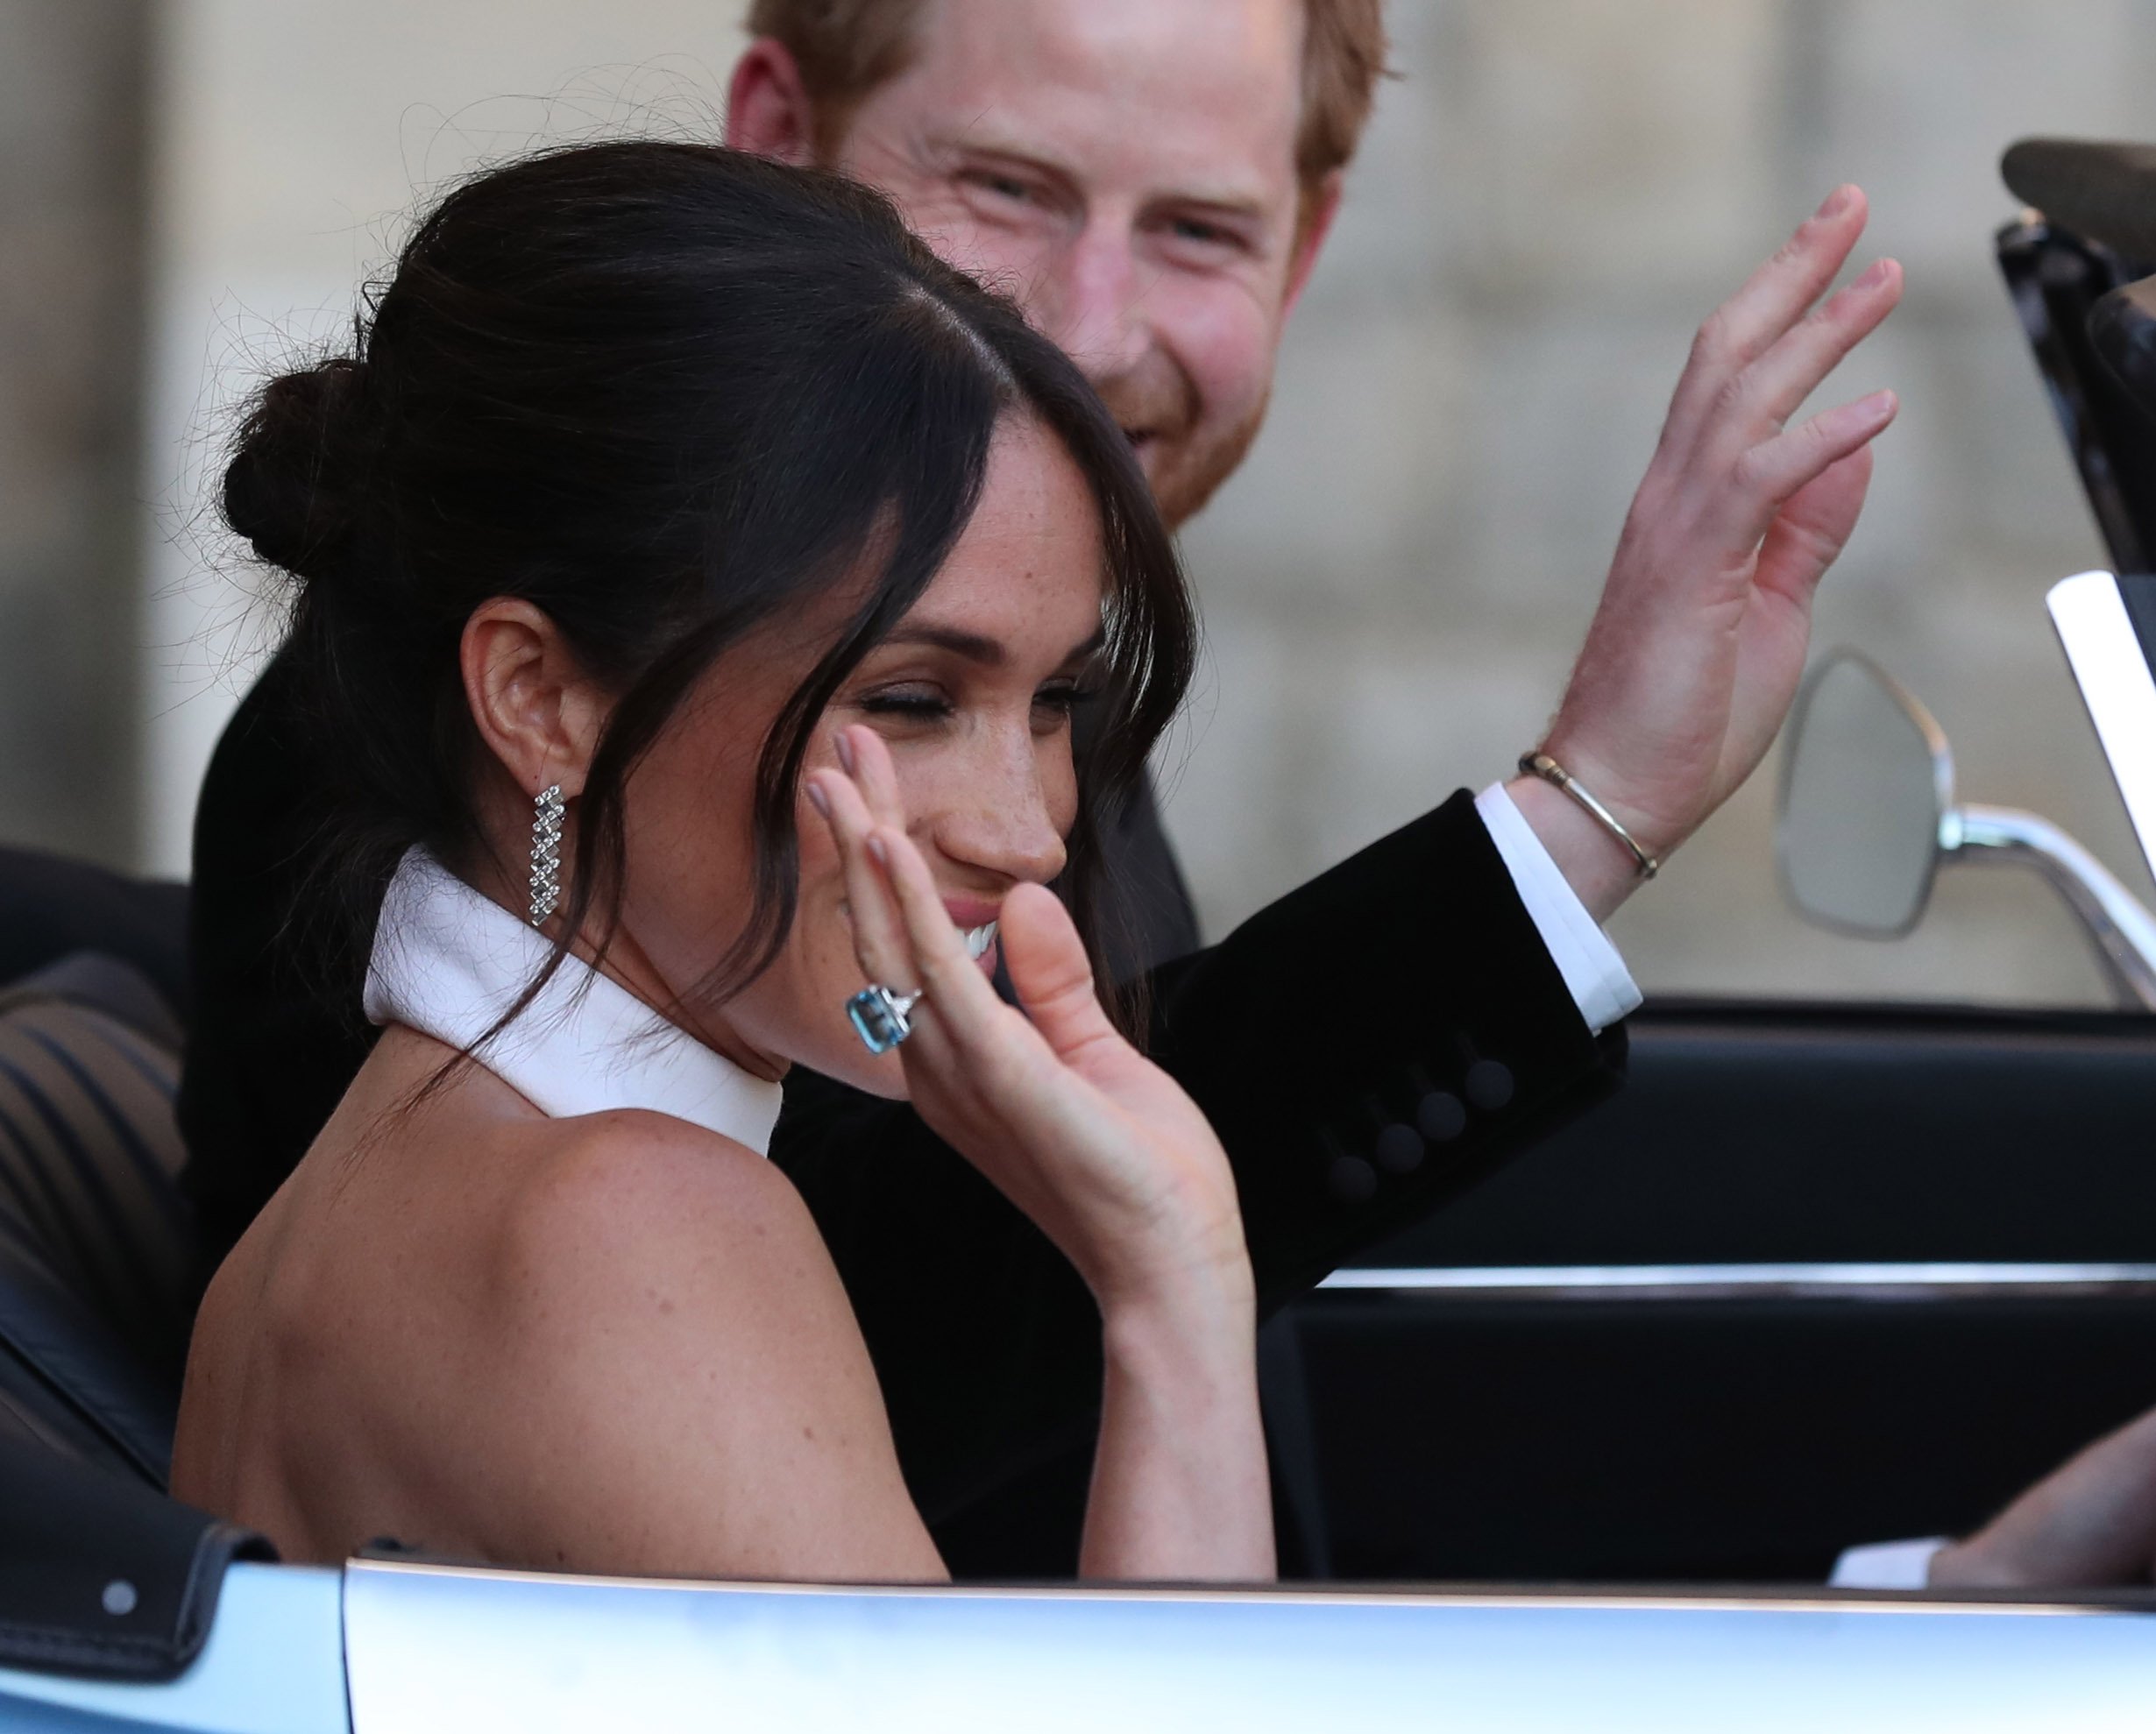 Duchess of Sussex and Prince Harry leave Windsor Castle after their wedding to attend an evening reception at Frogmore House on May 19, 2018, in Windsor, England. | Source: Steve Parsons - WPA Pool/Getty Images